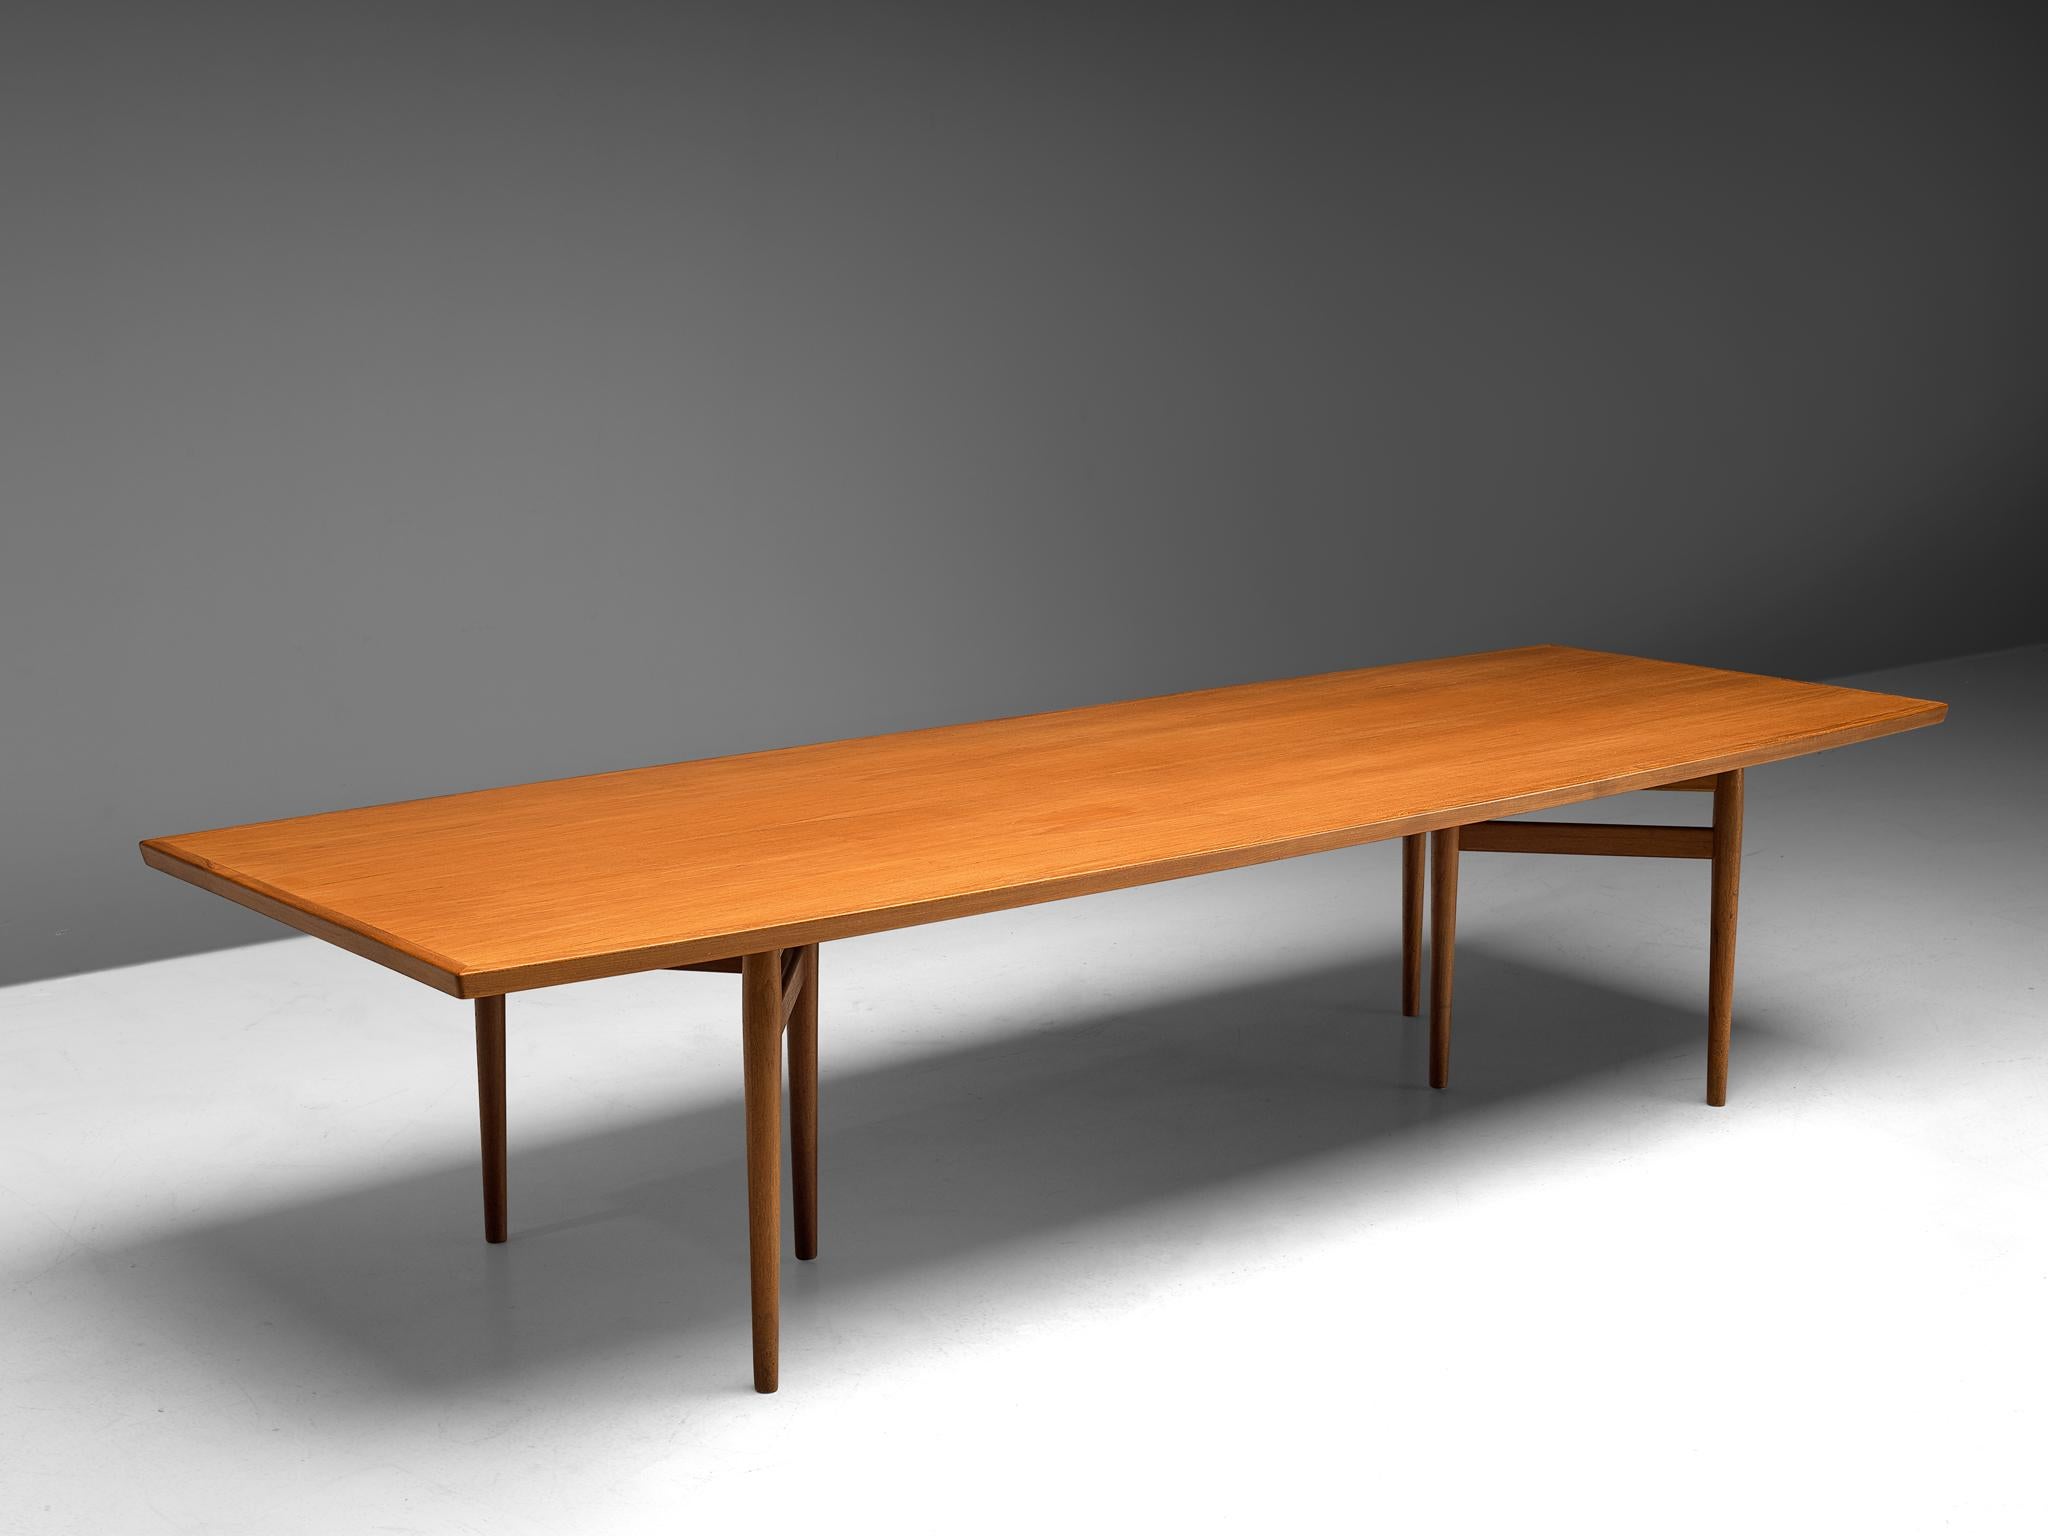 Arne Vodder, conference table, teak, Denmark, 1960s. 

This large dining table by Arne Vodder is a true example of the combination of slender and organic design with rounded colors and excellent material and craftsmanship. The boat-shaped table